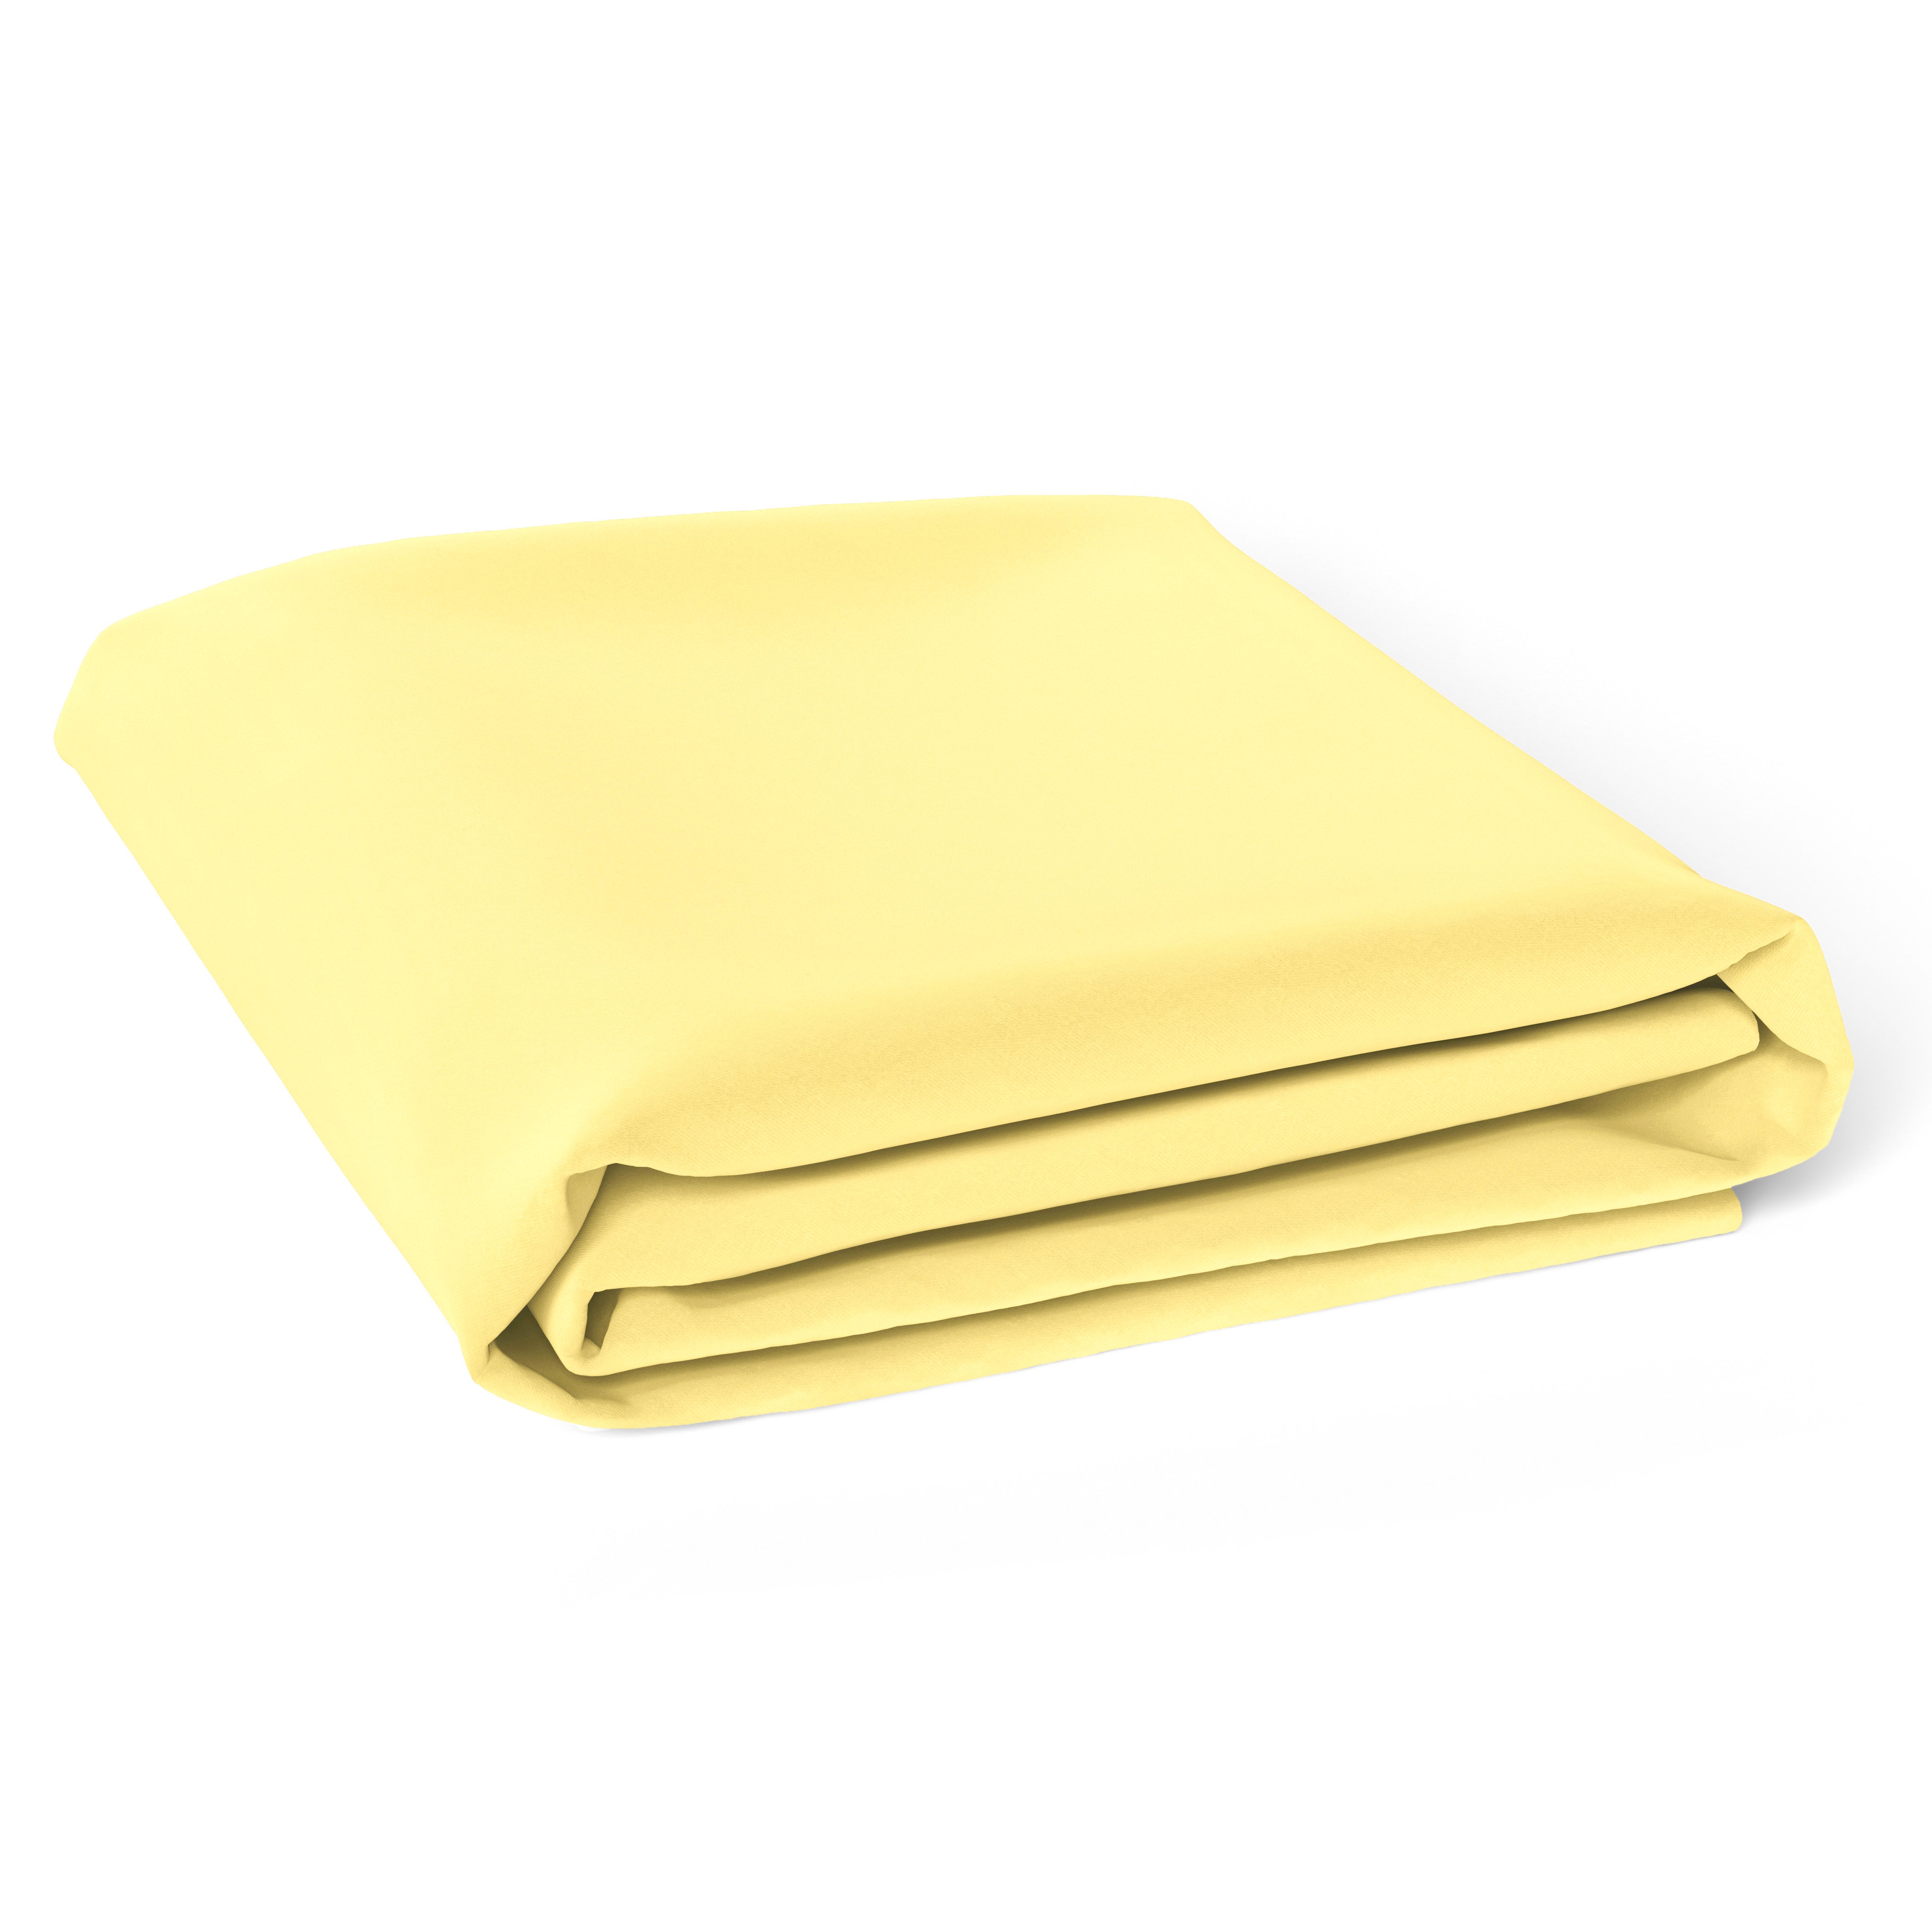 The White Cradle Pure Organic Cotton Flat Sheet for Baby Crib & Cot With Size 71 x 47 inch - Super Soft, Smooth, Absorbent, Twill Fabric for Infants, Newborns, Babies, Toddlers - Yellow